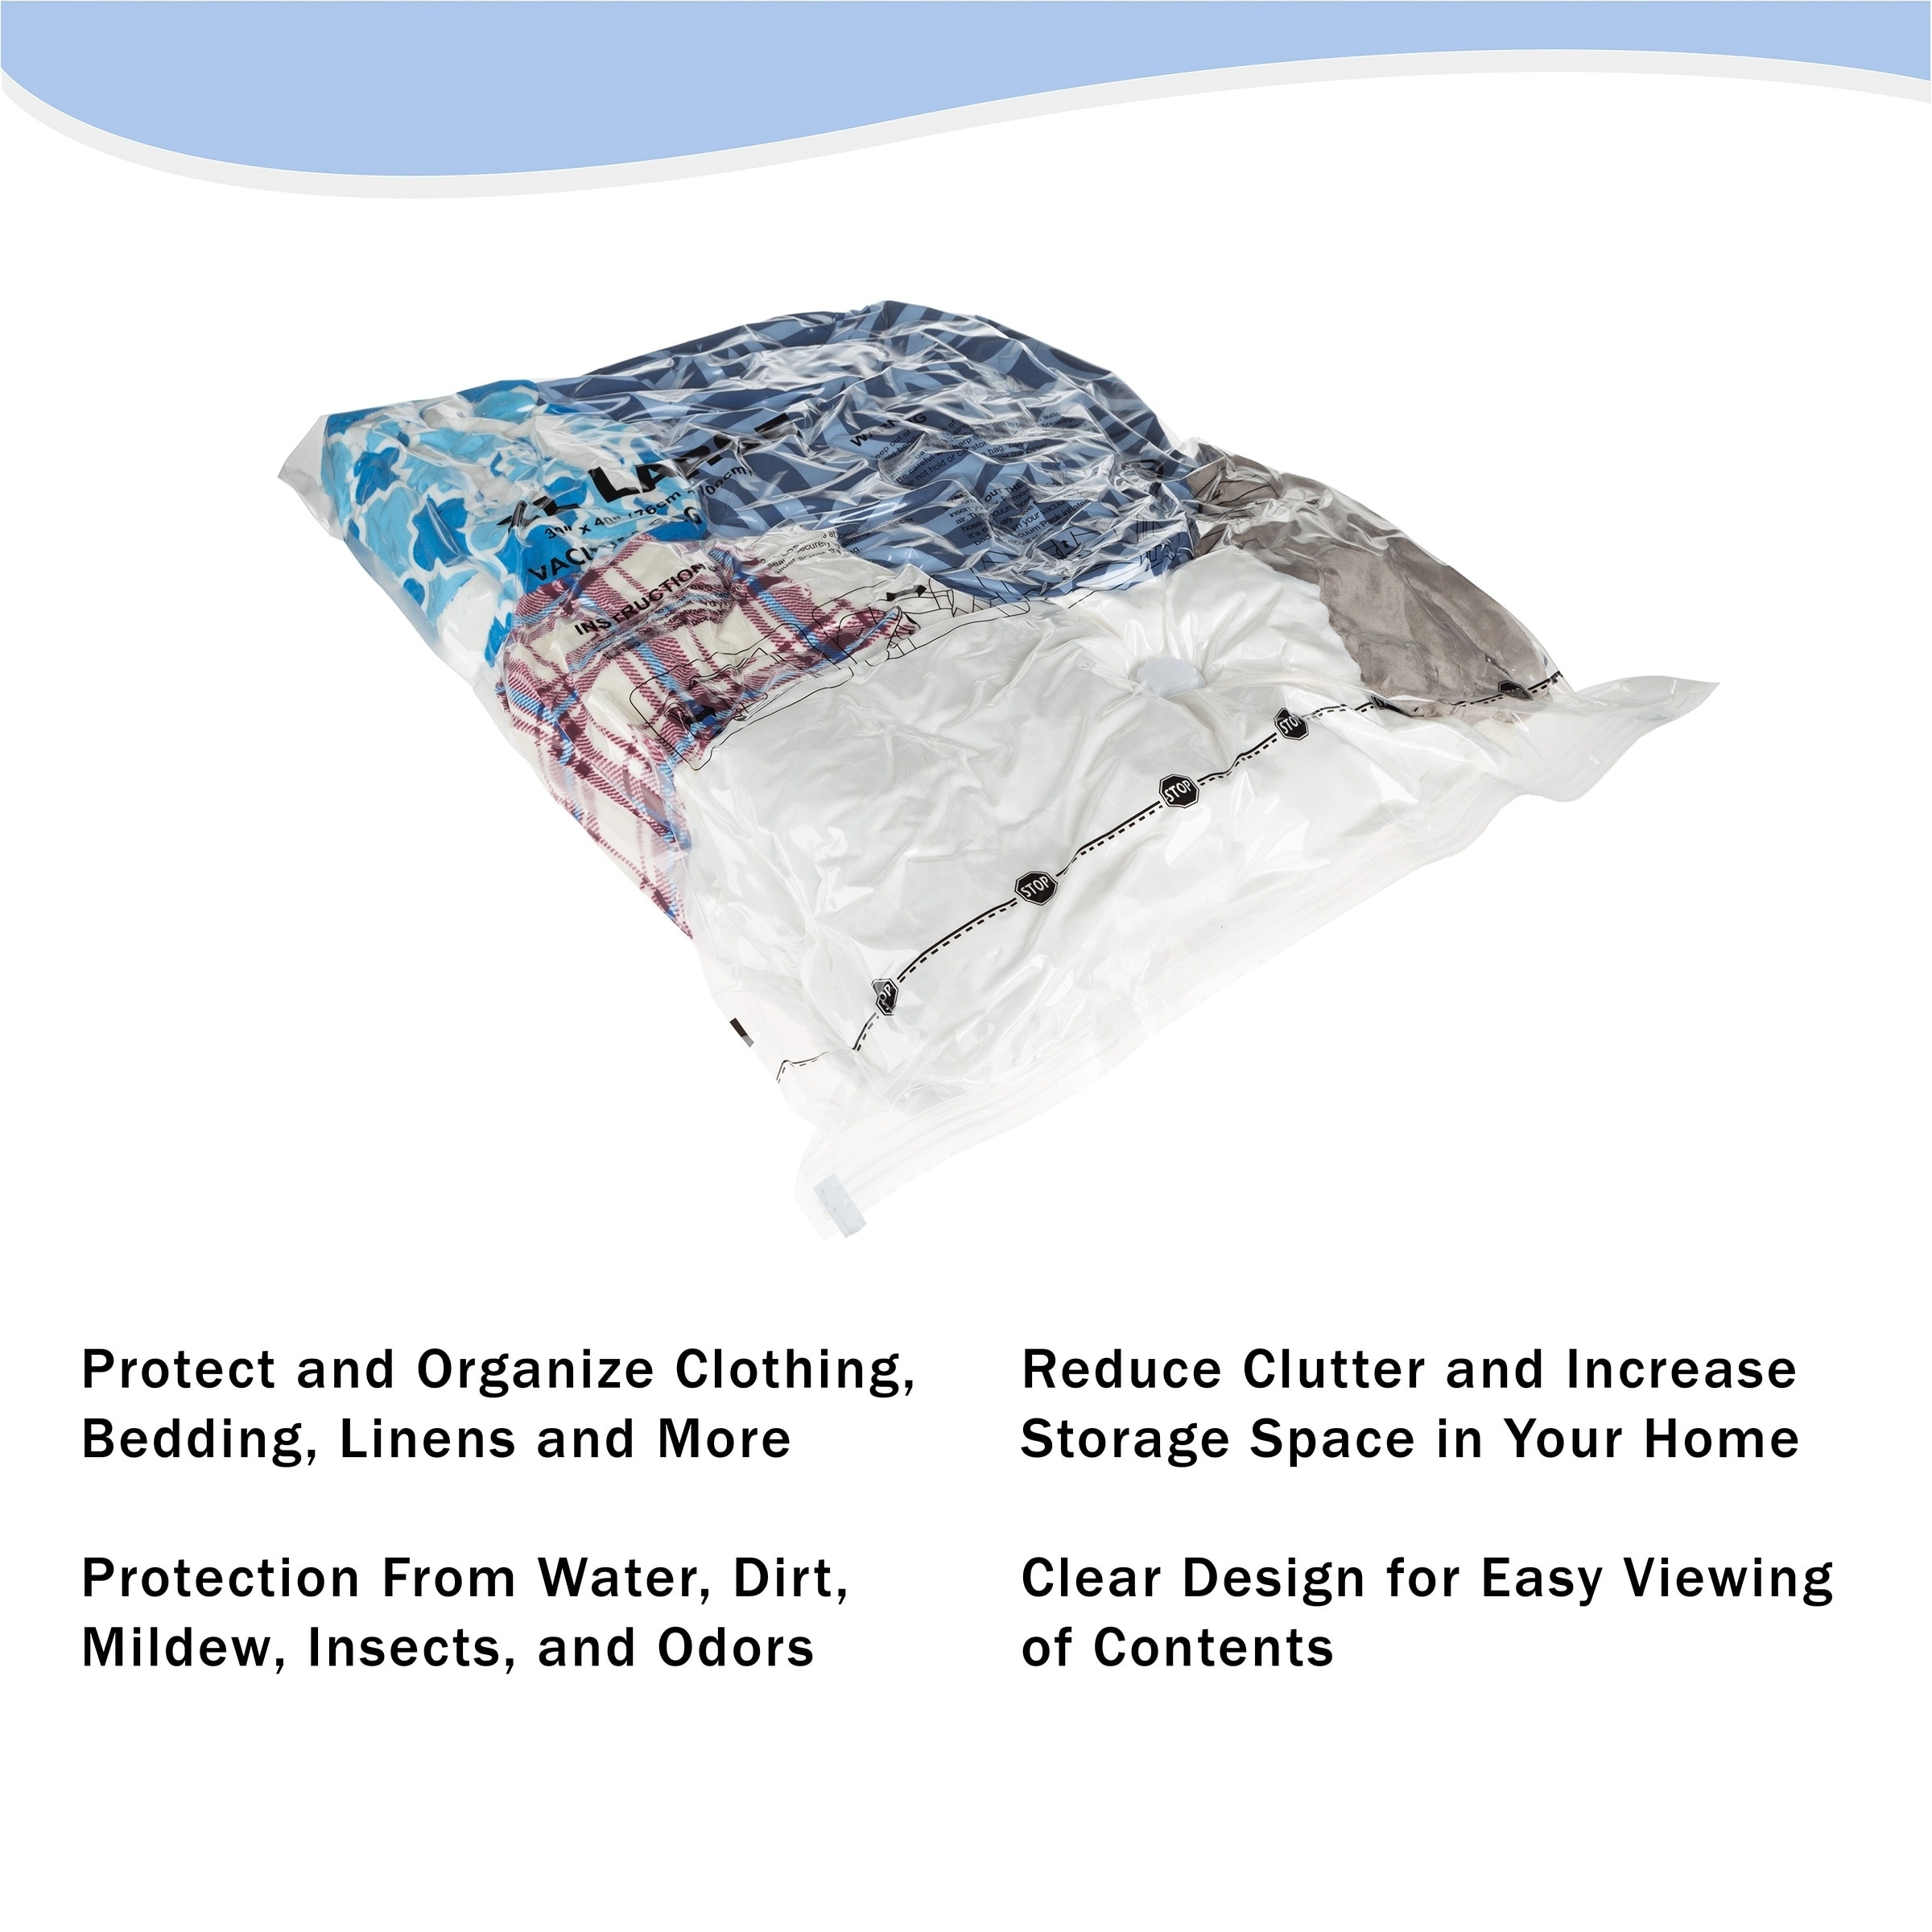 https://ak1.ostkcdn.com/images/products/27775493/5-Vacuum-Storage-Bags-Space-Saving-Air-Tight-Compression-Shrink-Closet-Clutter-Store-Organize-Clothes-Linens-by-Lavish-Home-dbba4197-8c3e-435e-8c0d-85791075bec5.jpg